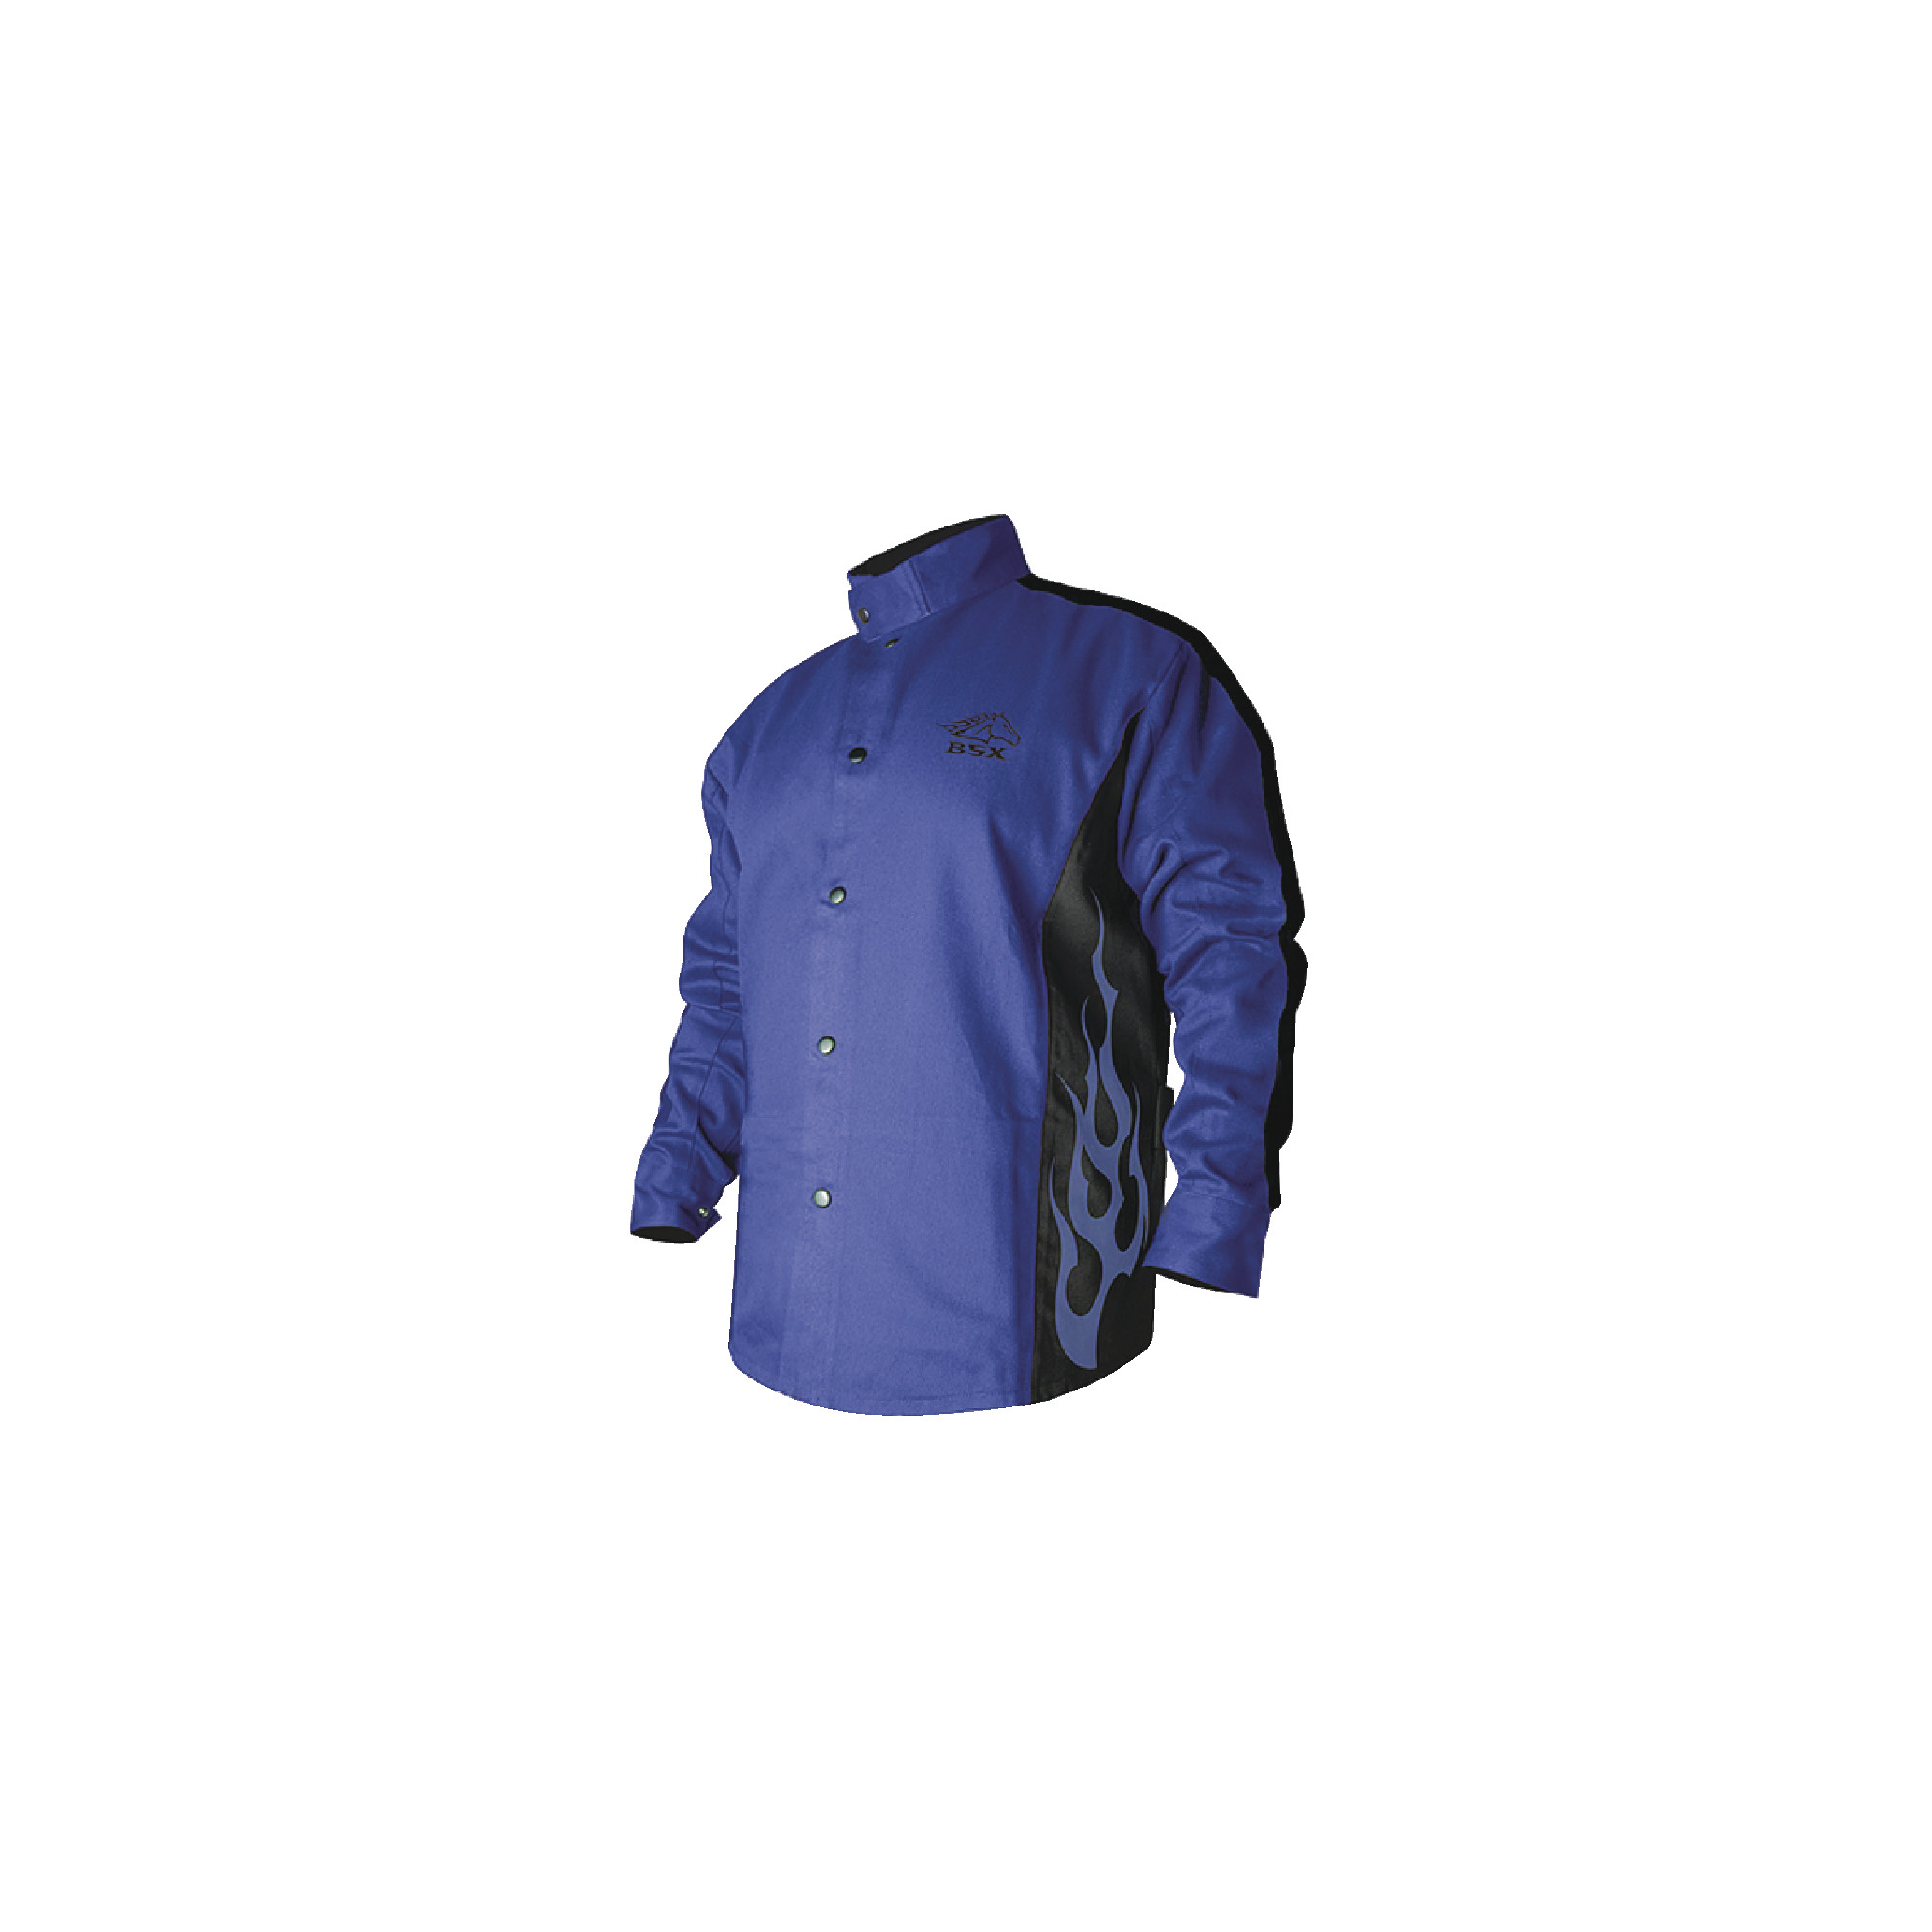 BSX Stryker Blue With Blue Flames Fire Resistant Welding Jacket - Size XL